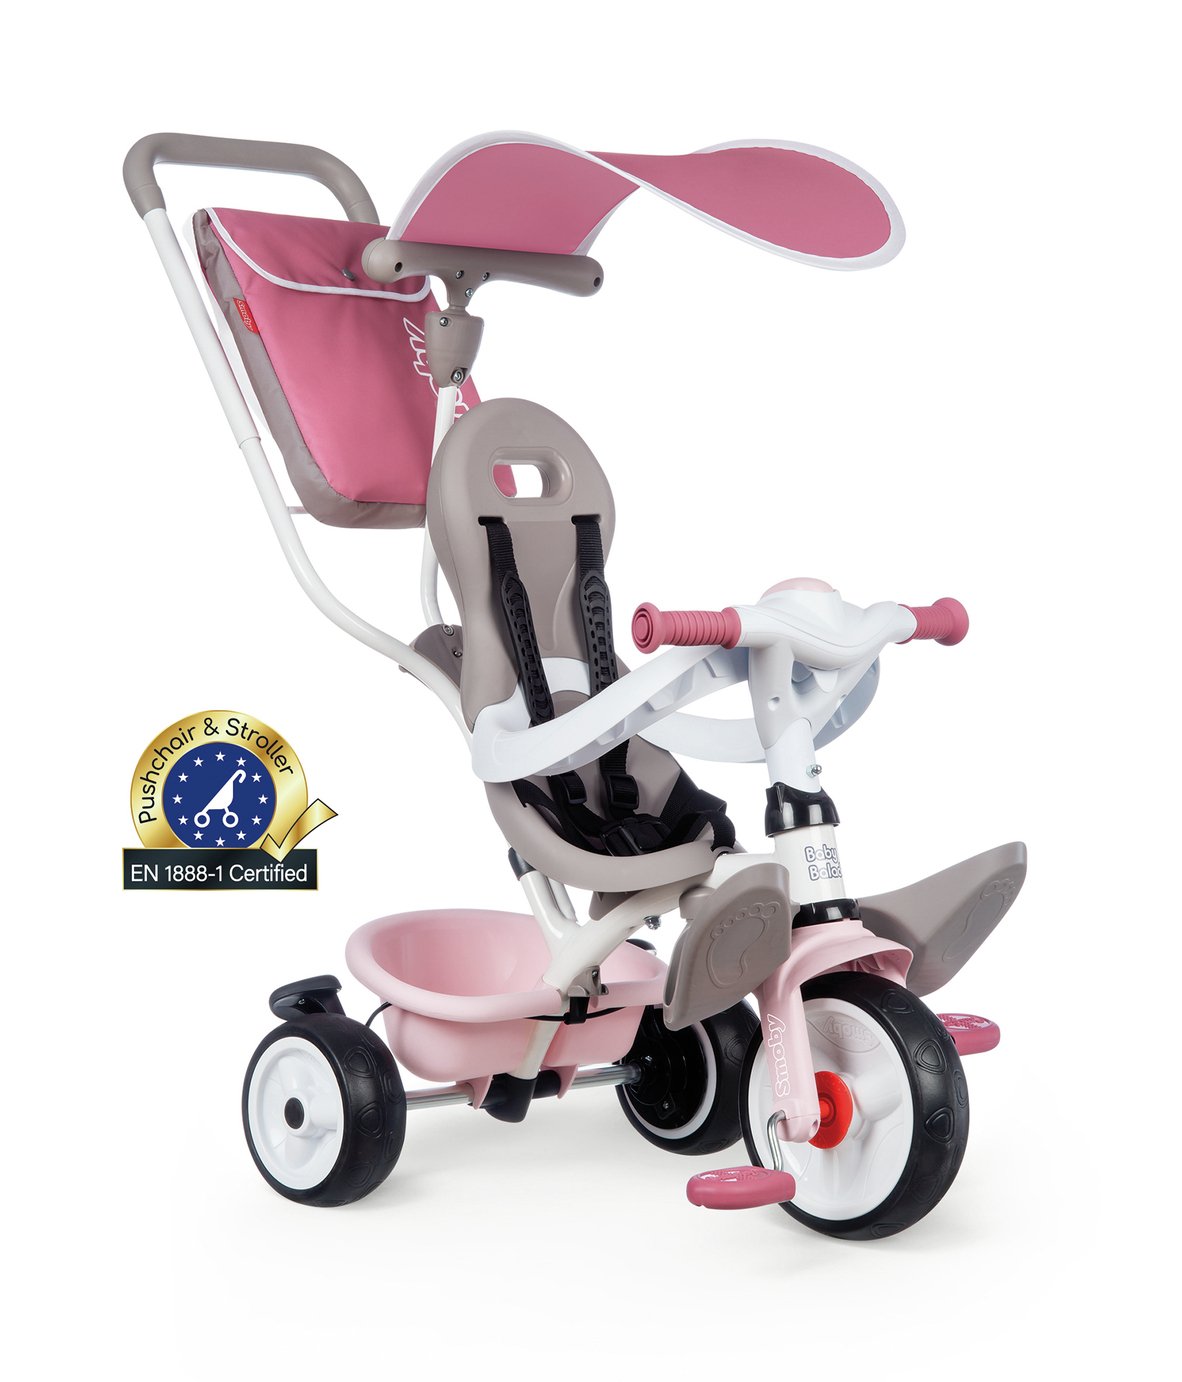 Smoby Baby Balade 3-in-1 Trike Ride On review